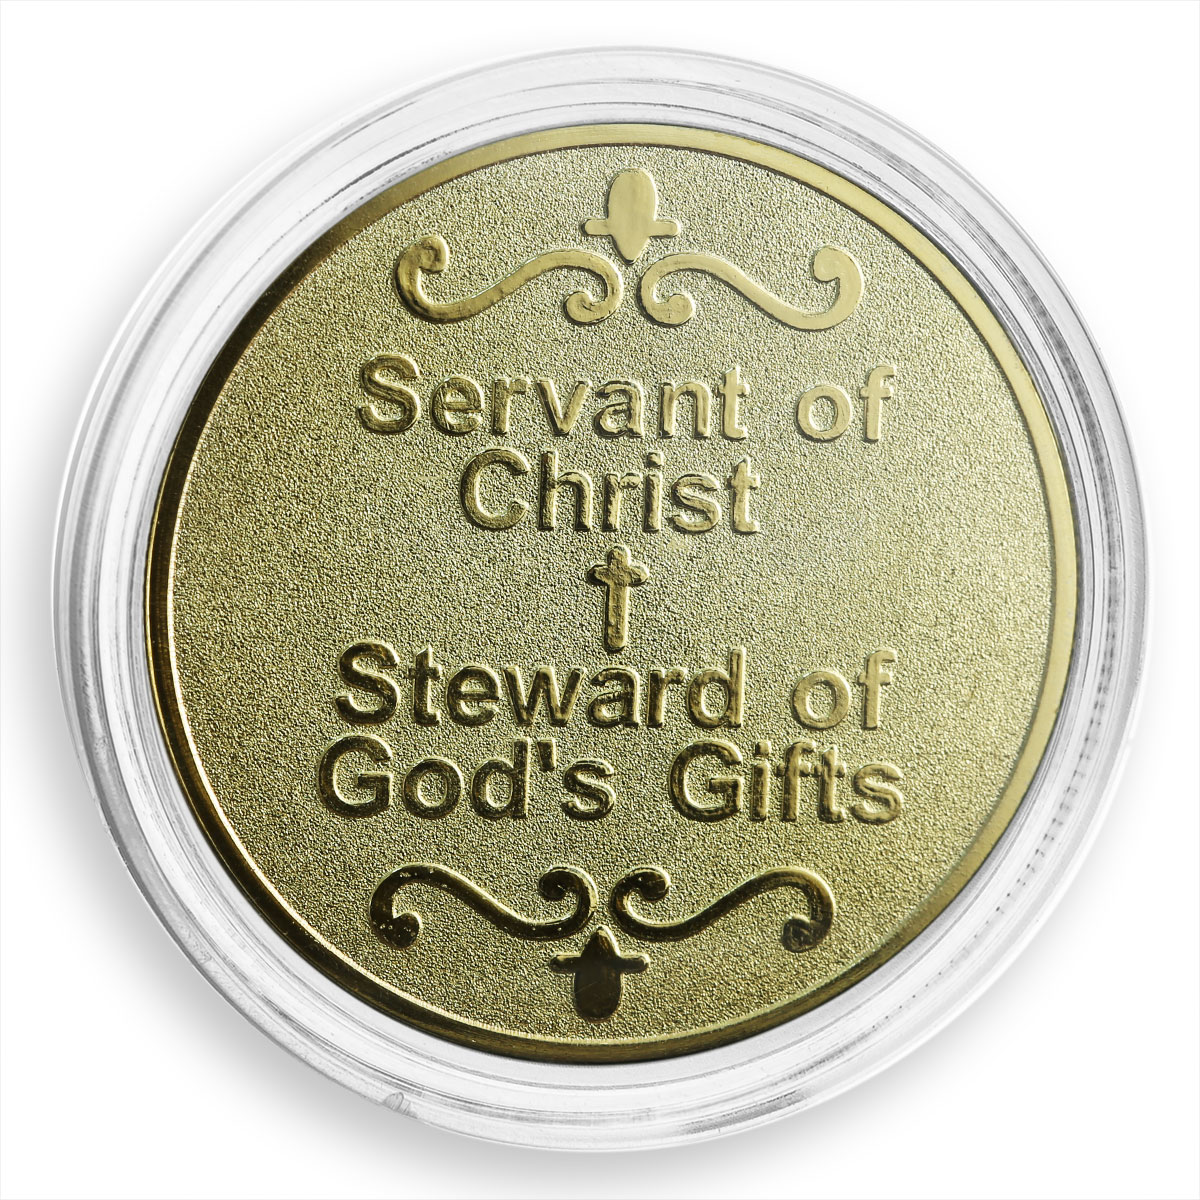 The servants of Christ and stewards of God's gifts, Cross, gilded token